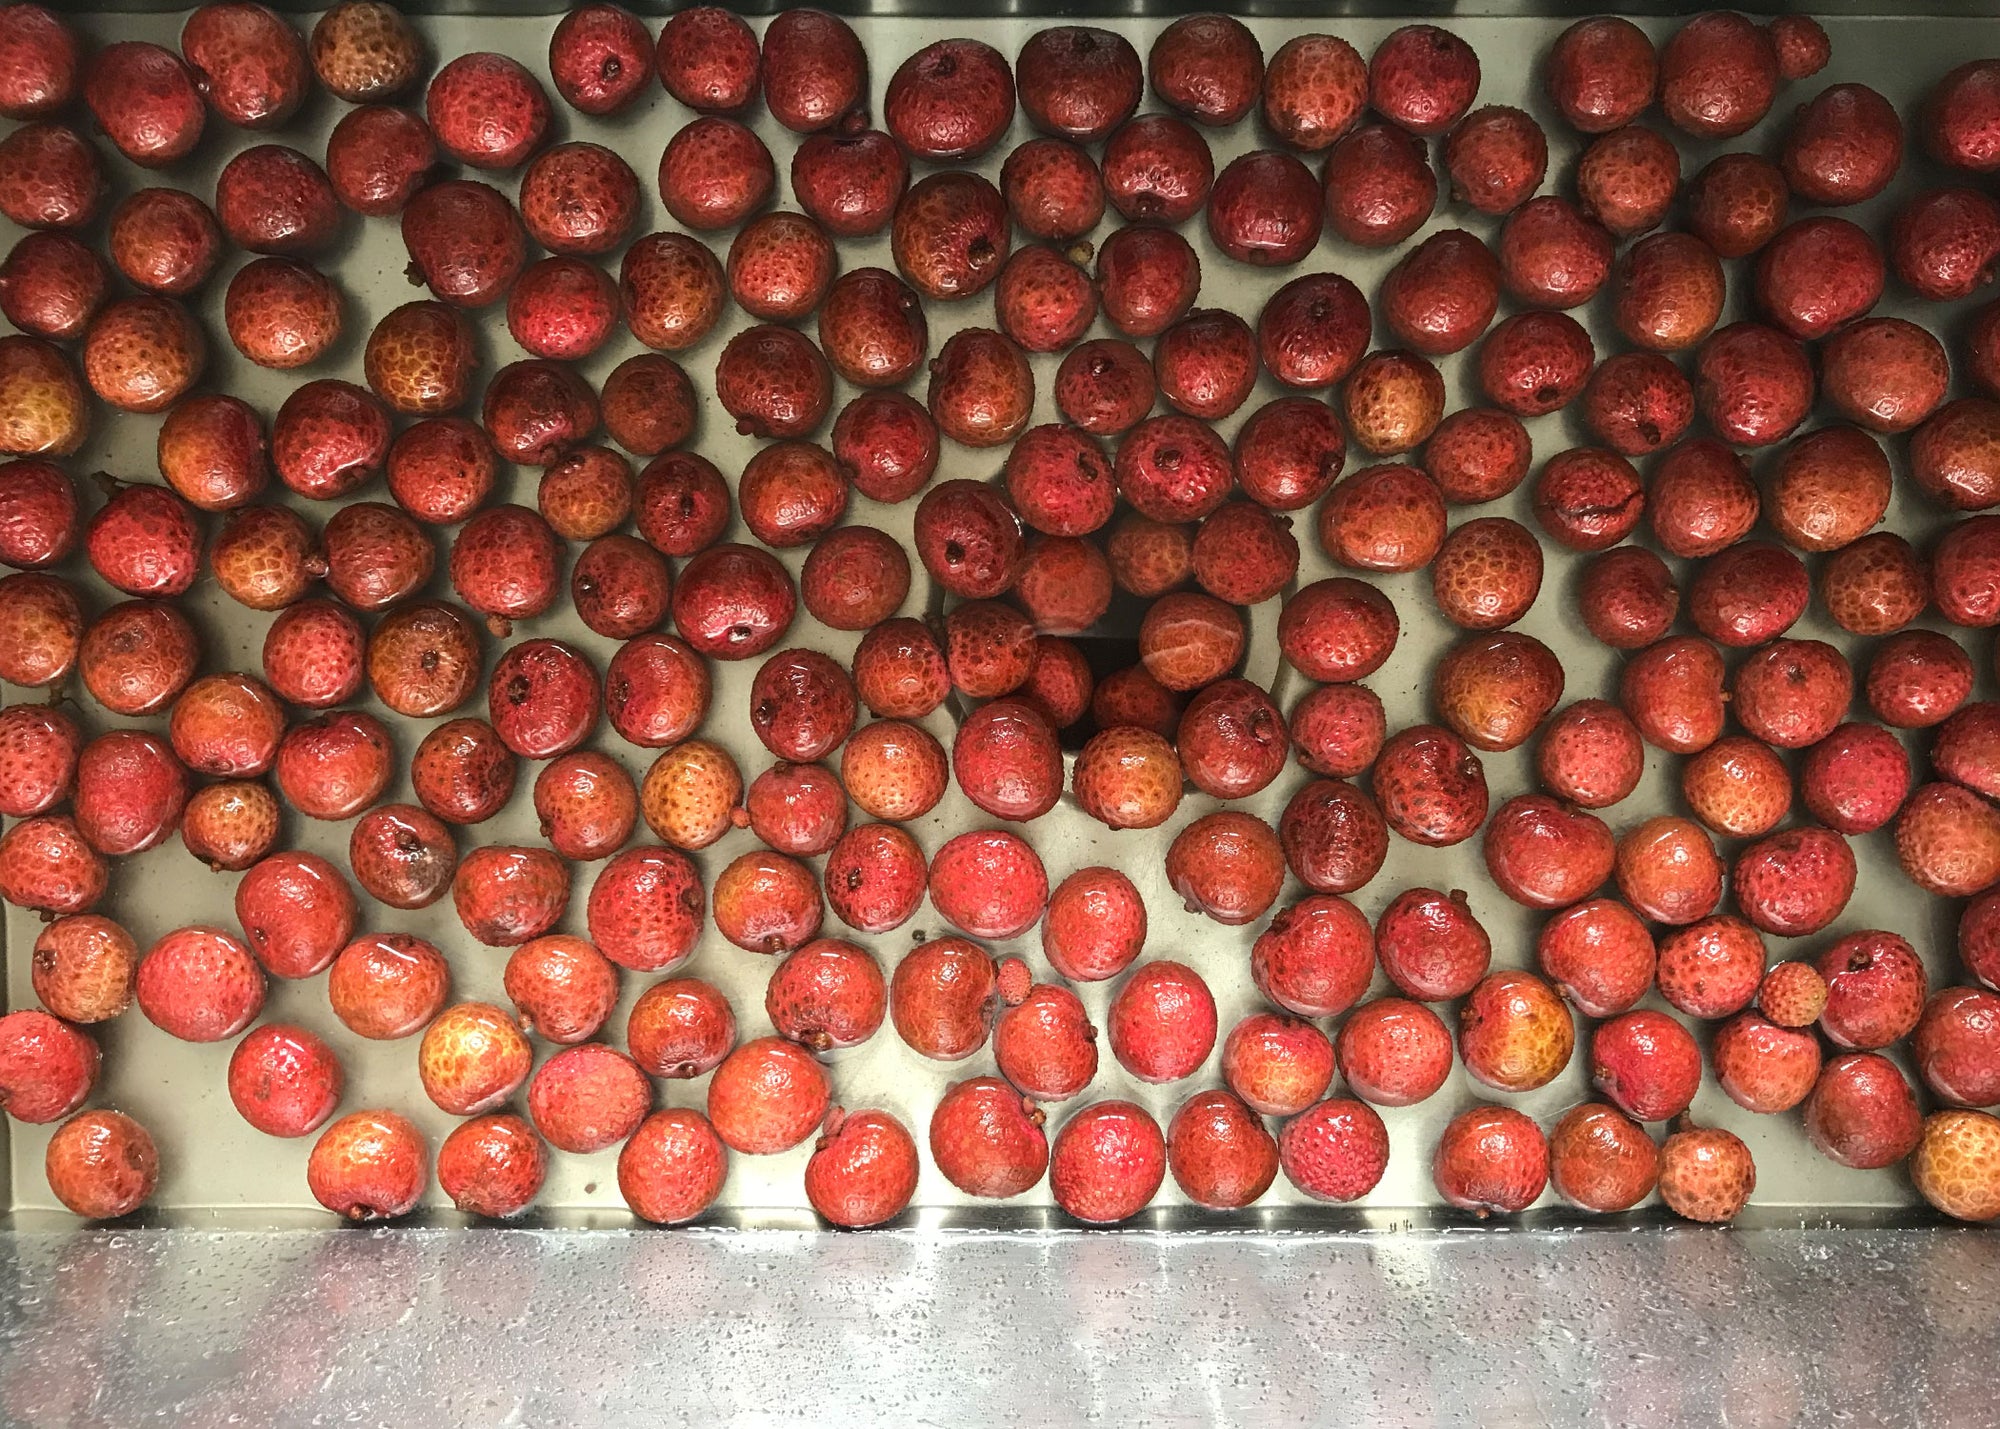 Lychee fruit in large sink, being rinsed with water after being delivered.